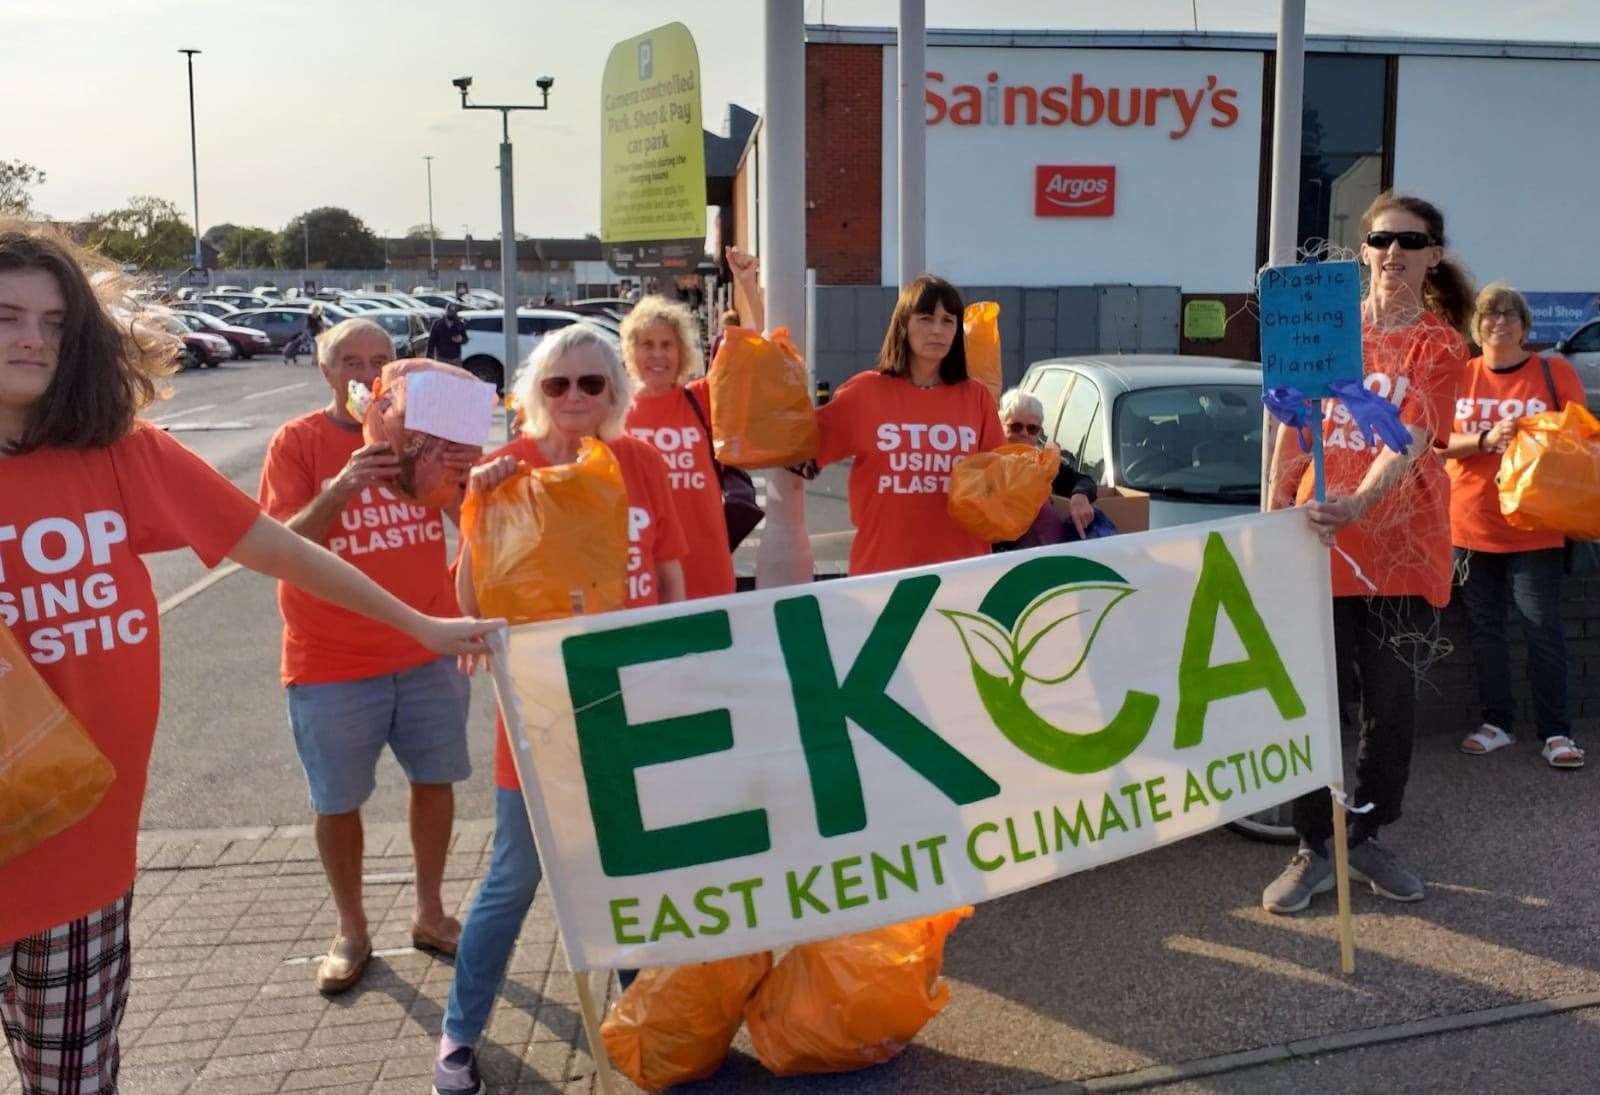 East Kent Climate Action hold a protest outside Sainsbury's in Deal Picture: Helen O'Brien